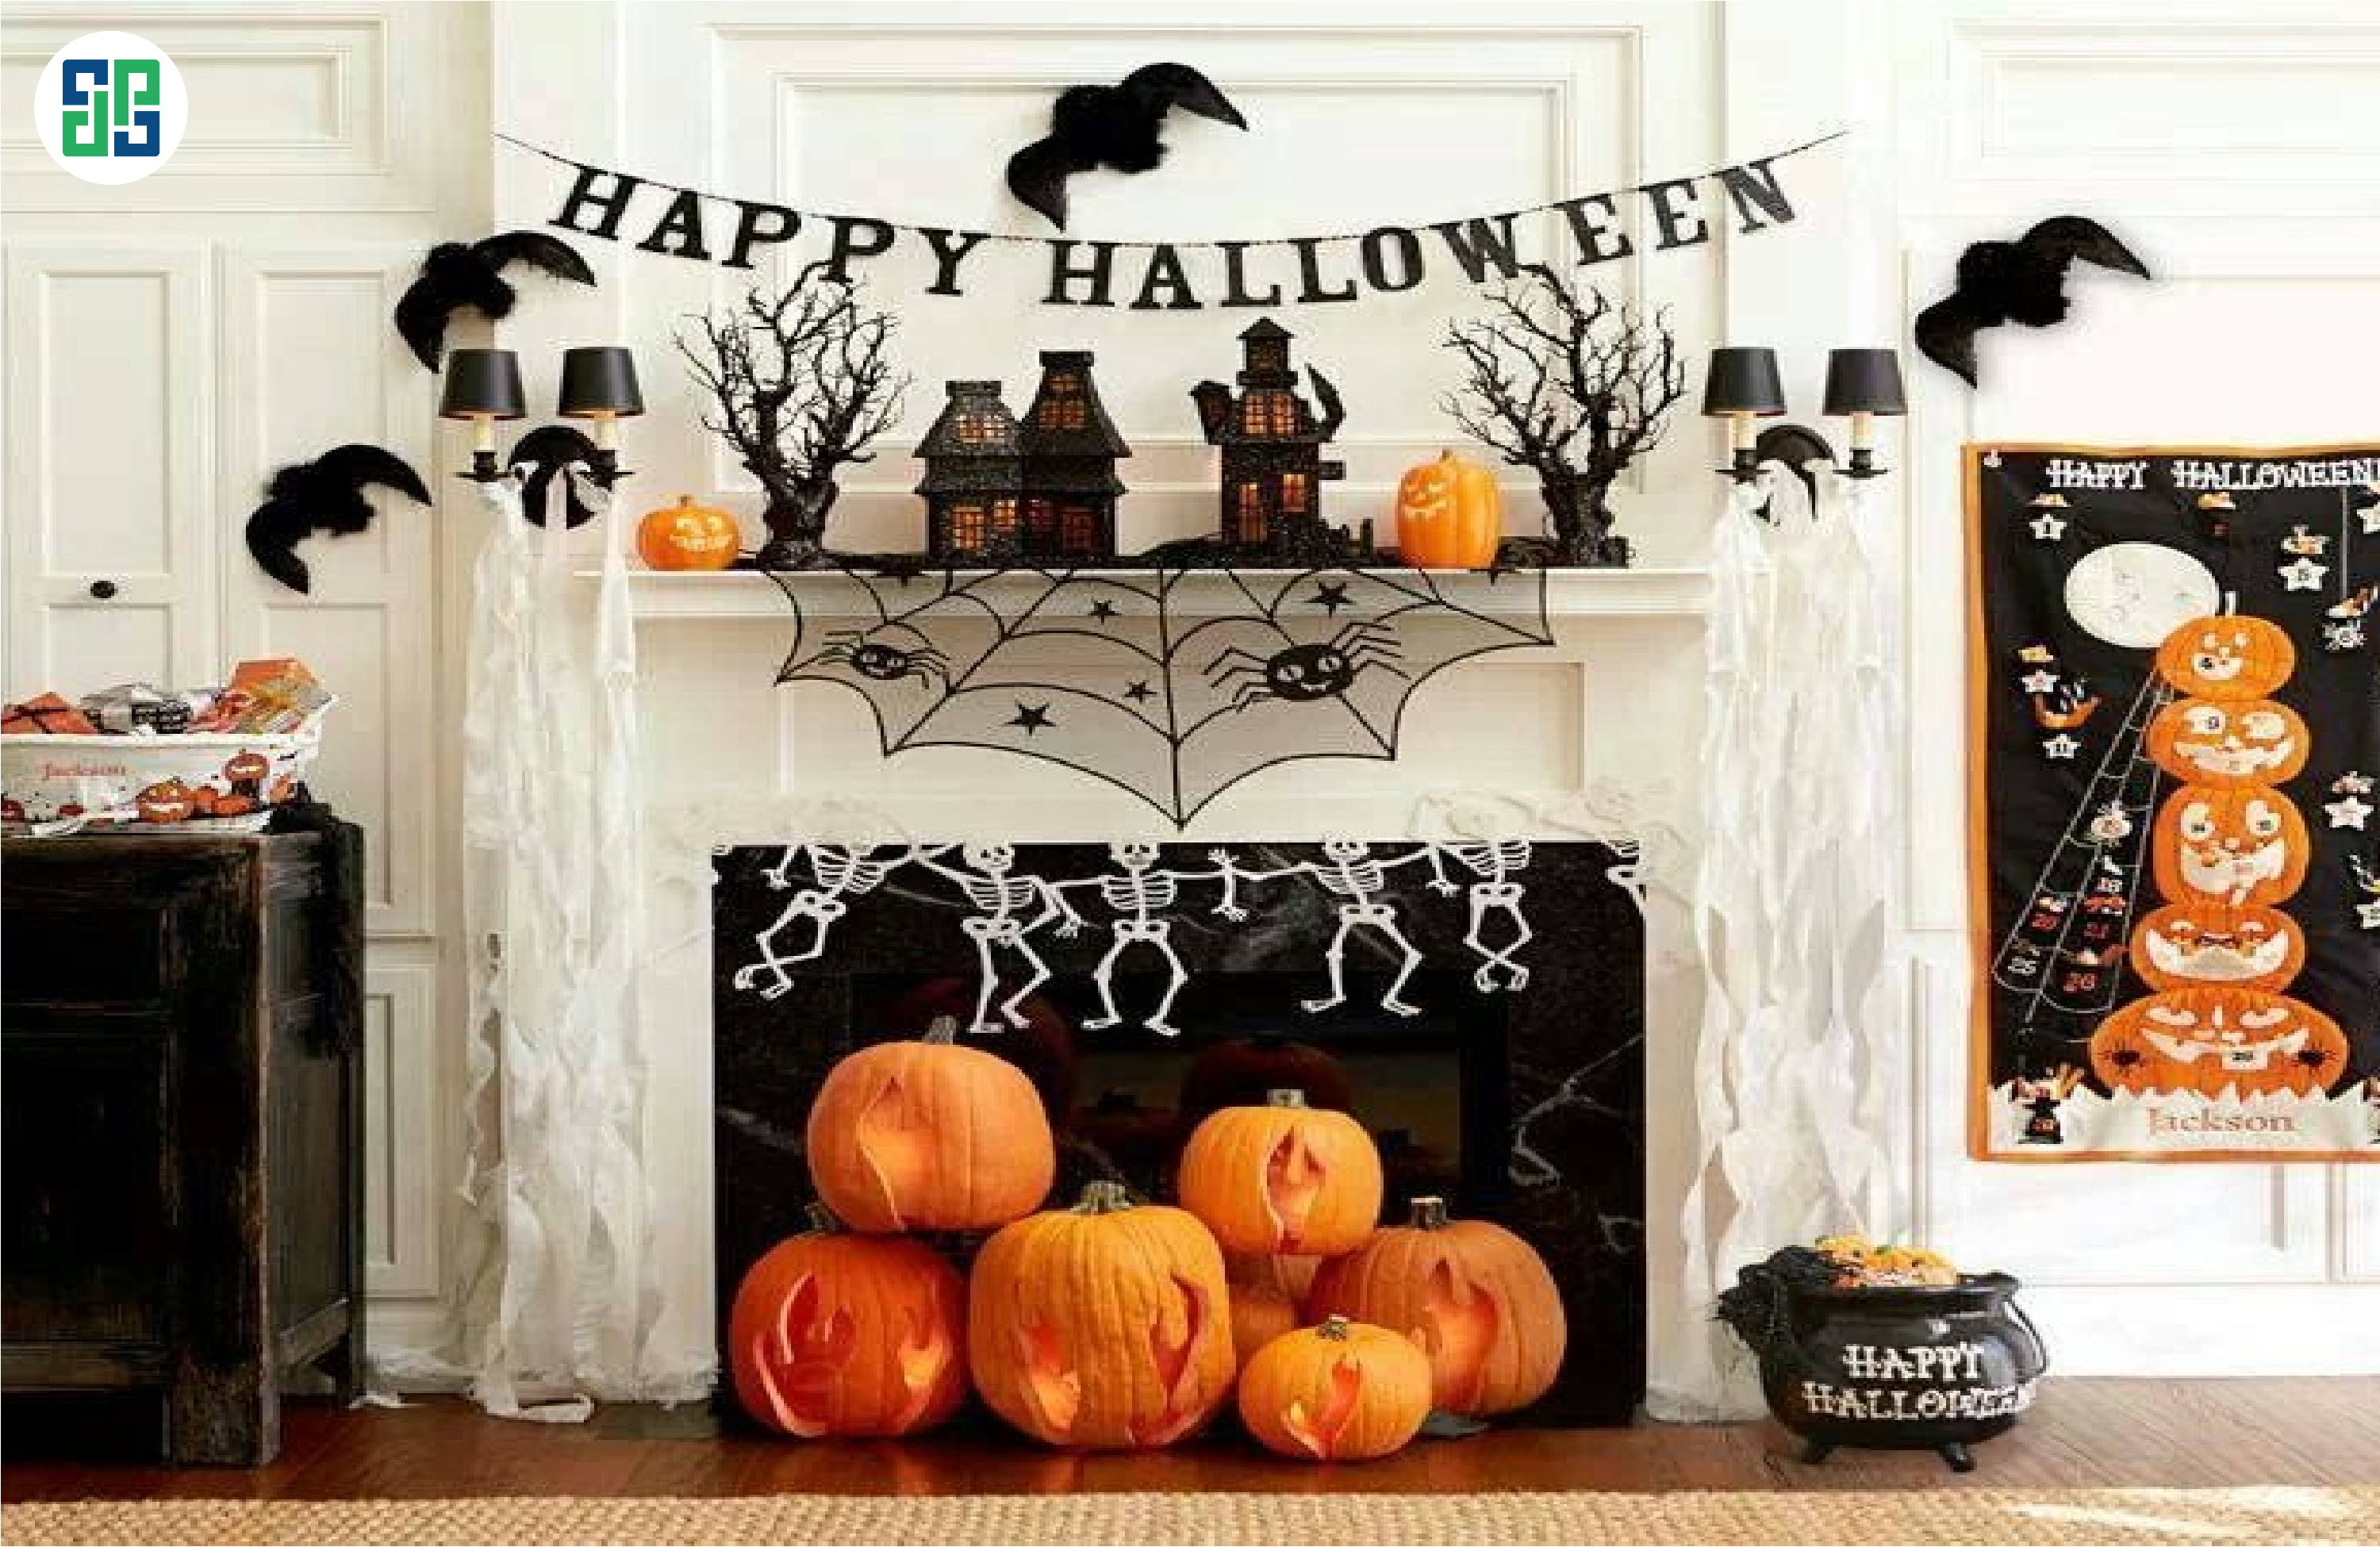 Create a content marketing campaign on Halloween October 31 to decorate for the festival